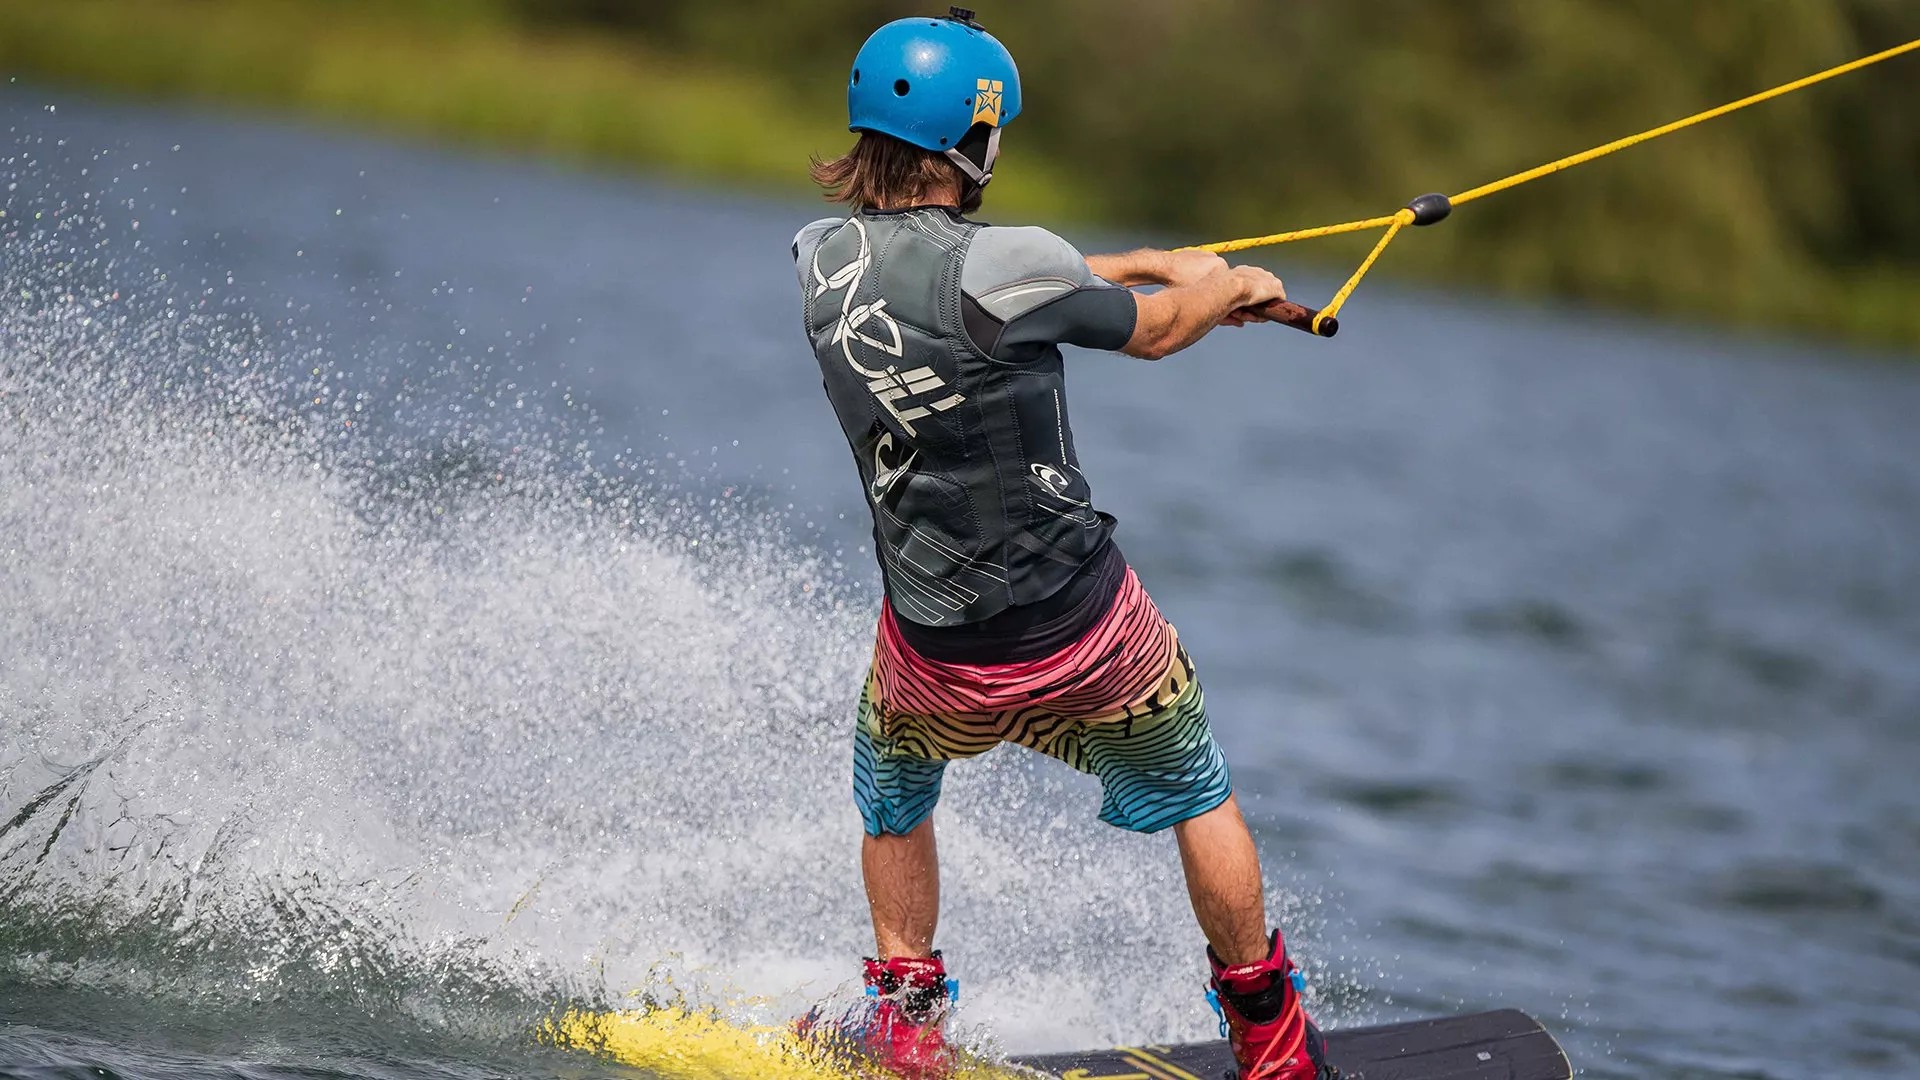 Wakeboarding at Willen Lake in United Kingdom, Europe | Wakeboarding - Rated 0.9